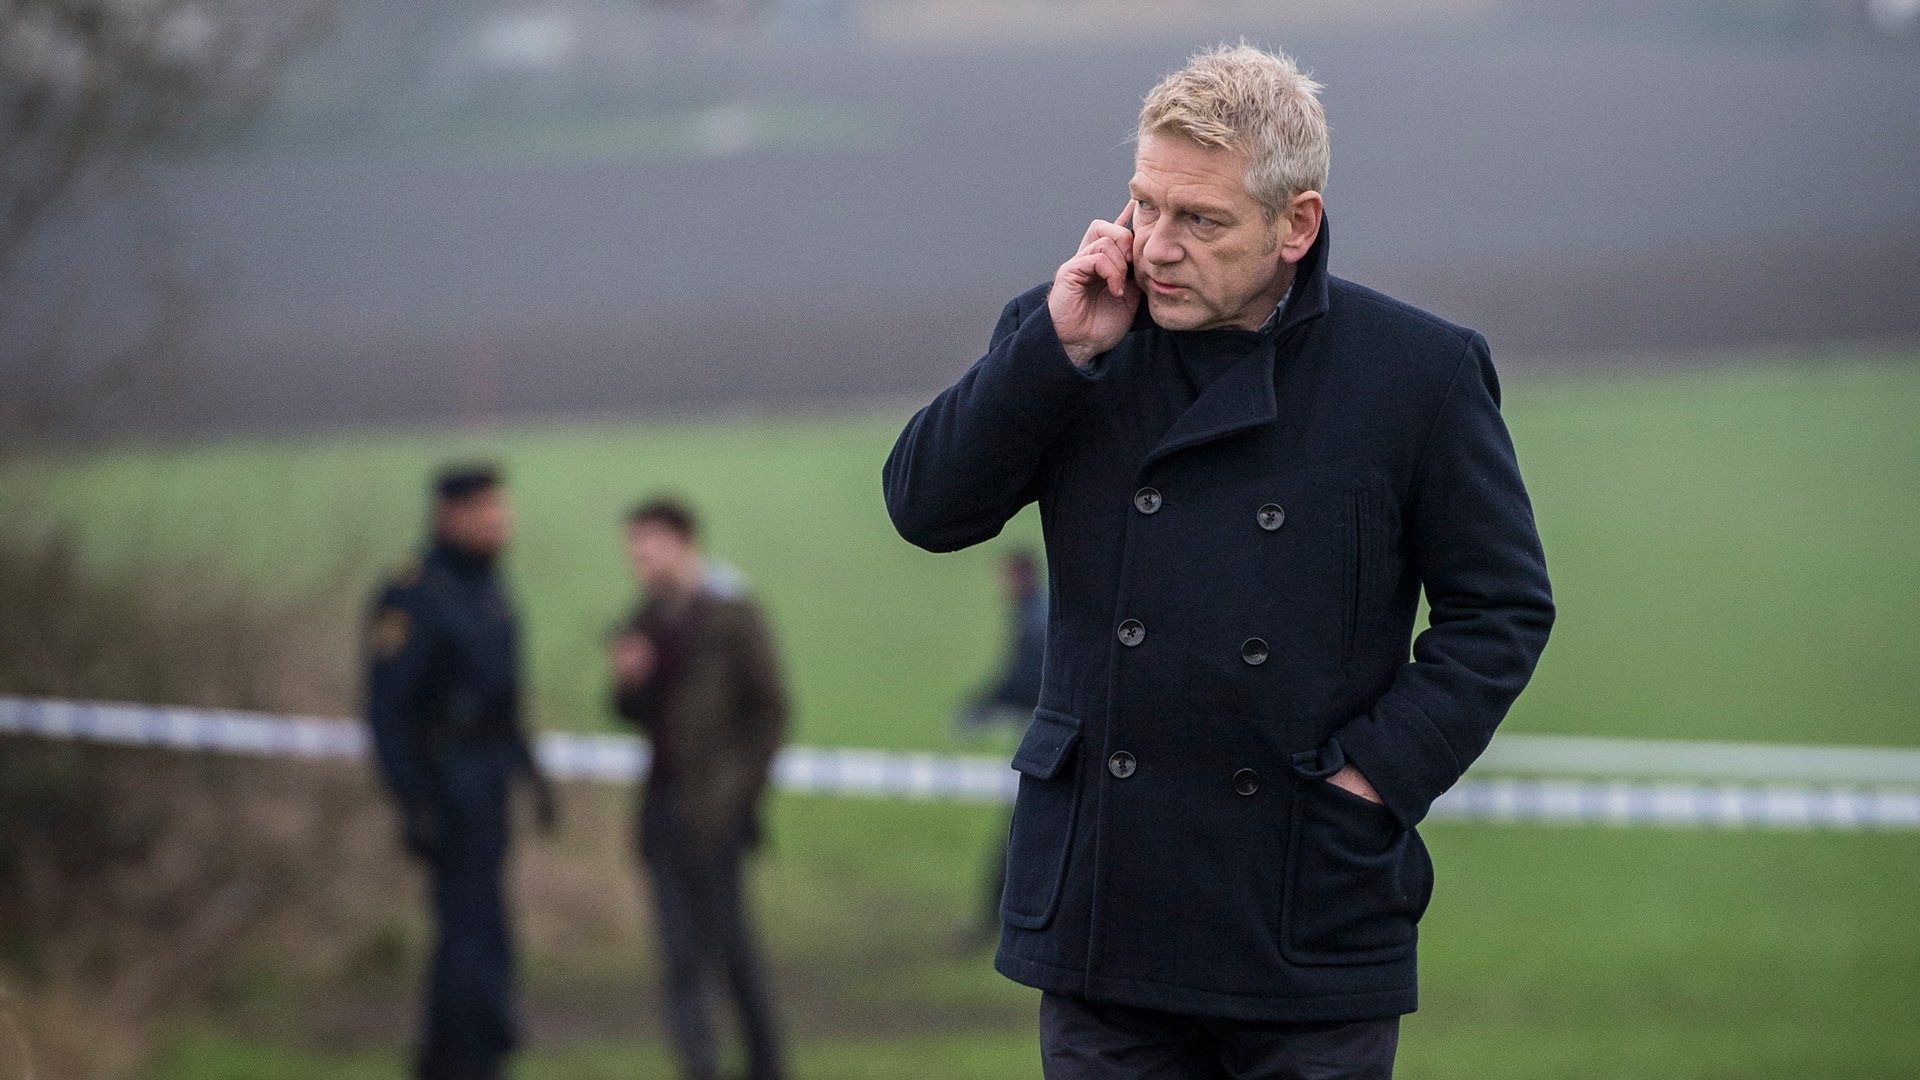 Kenneth Branagh: The star of the English-language Wallander television series. 1920x1080 Full HD Wallpaper.